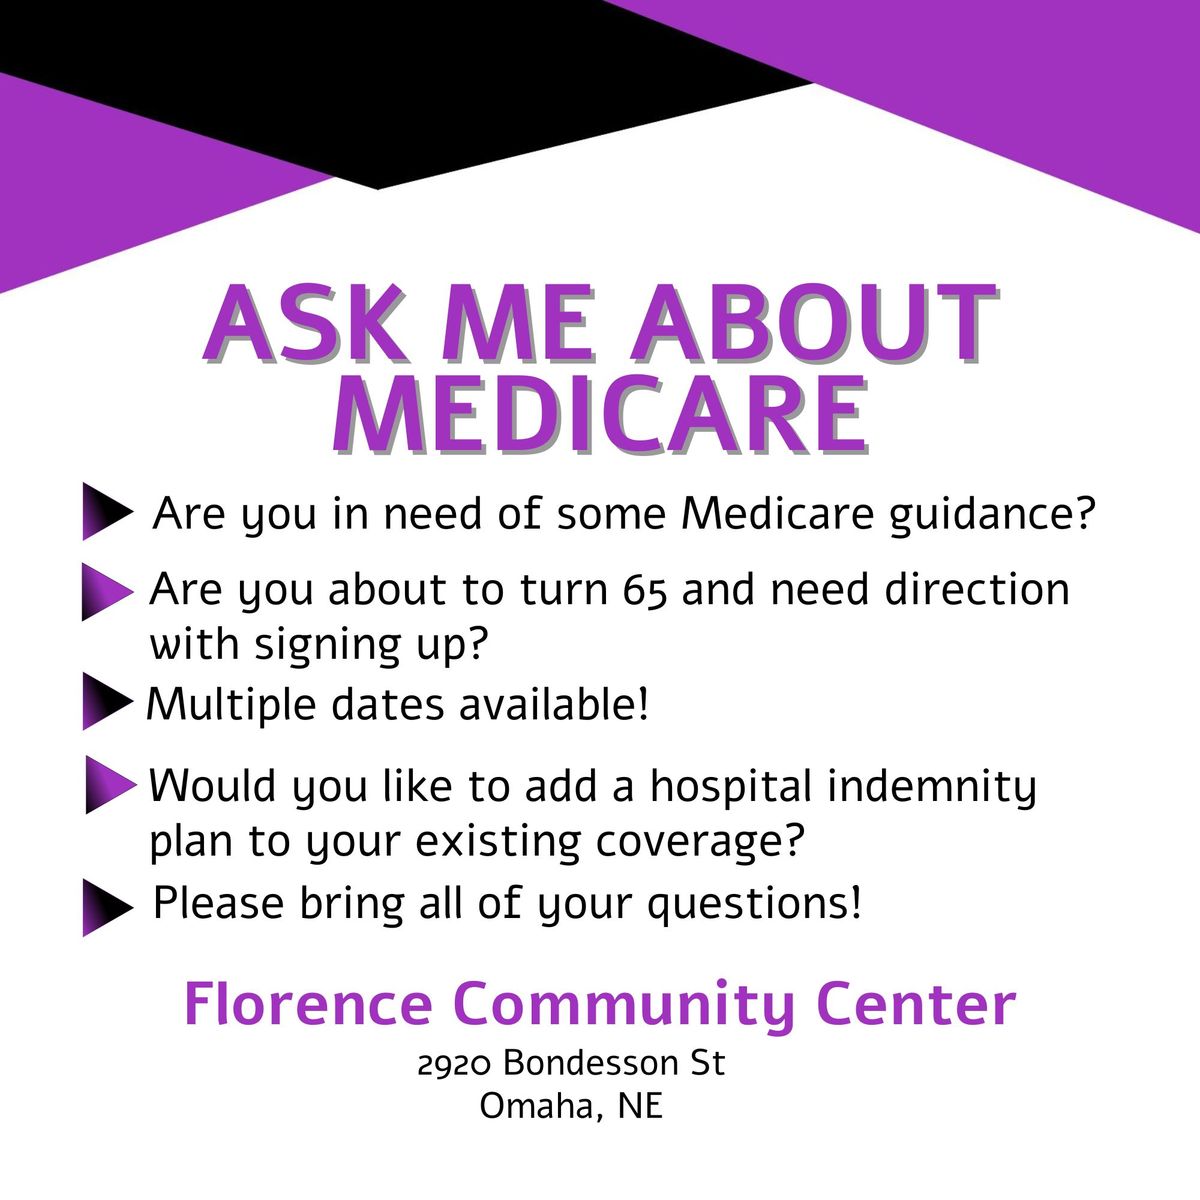 Ask Me About Medicare